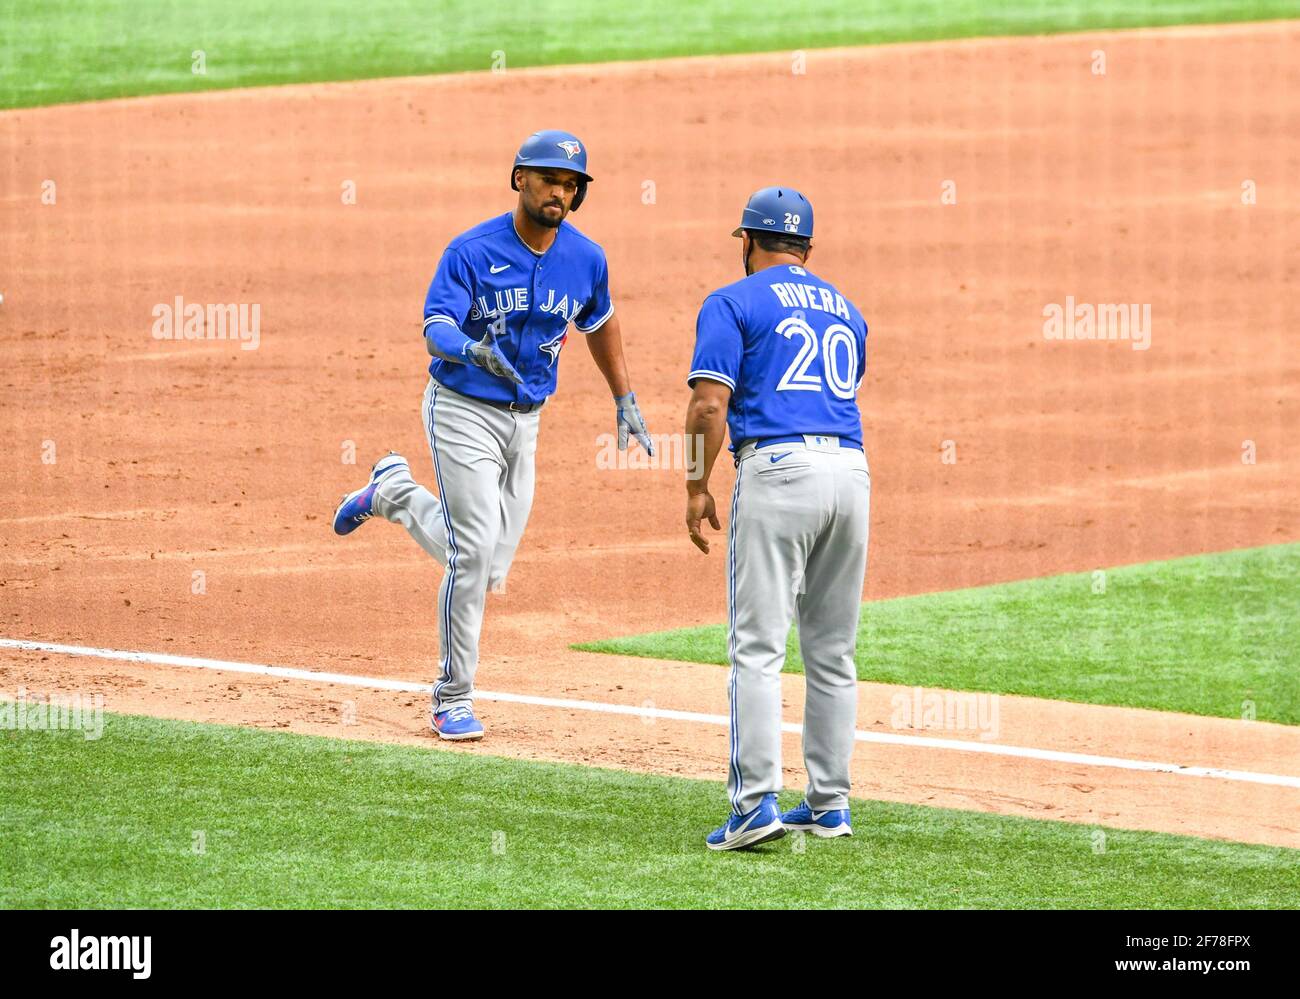 Apr 10, 2021: Toronto Blue Jays shortstop Marcus Semien #10 shakes hands with third base coach Luis Rivera #20 as he rounds third base after hitting a two run home run in the top of the second inning during an Opening Day MLB game between the Toronto Blue Jays and the Texas Rangers at Globe Life Field in Arlington, TX Albert Pena/CSM Stock Photo